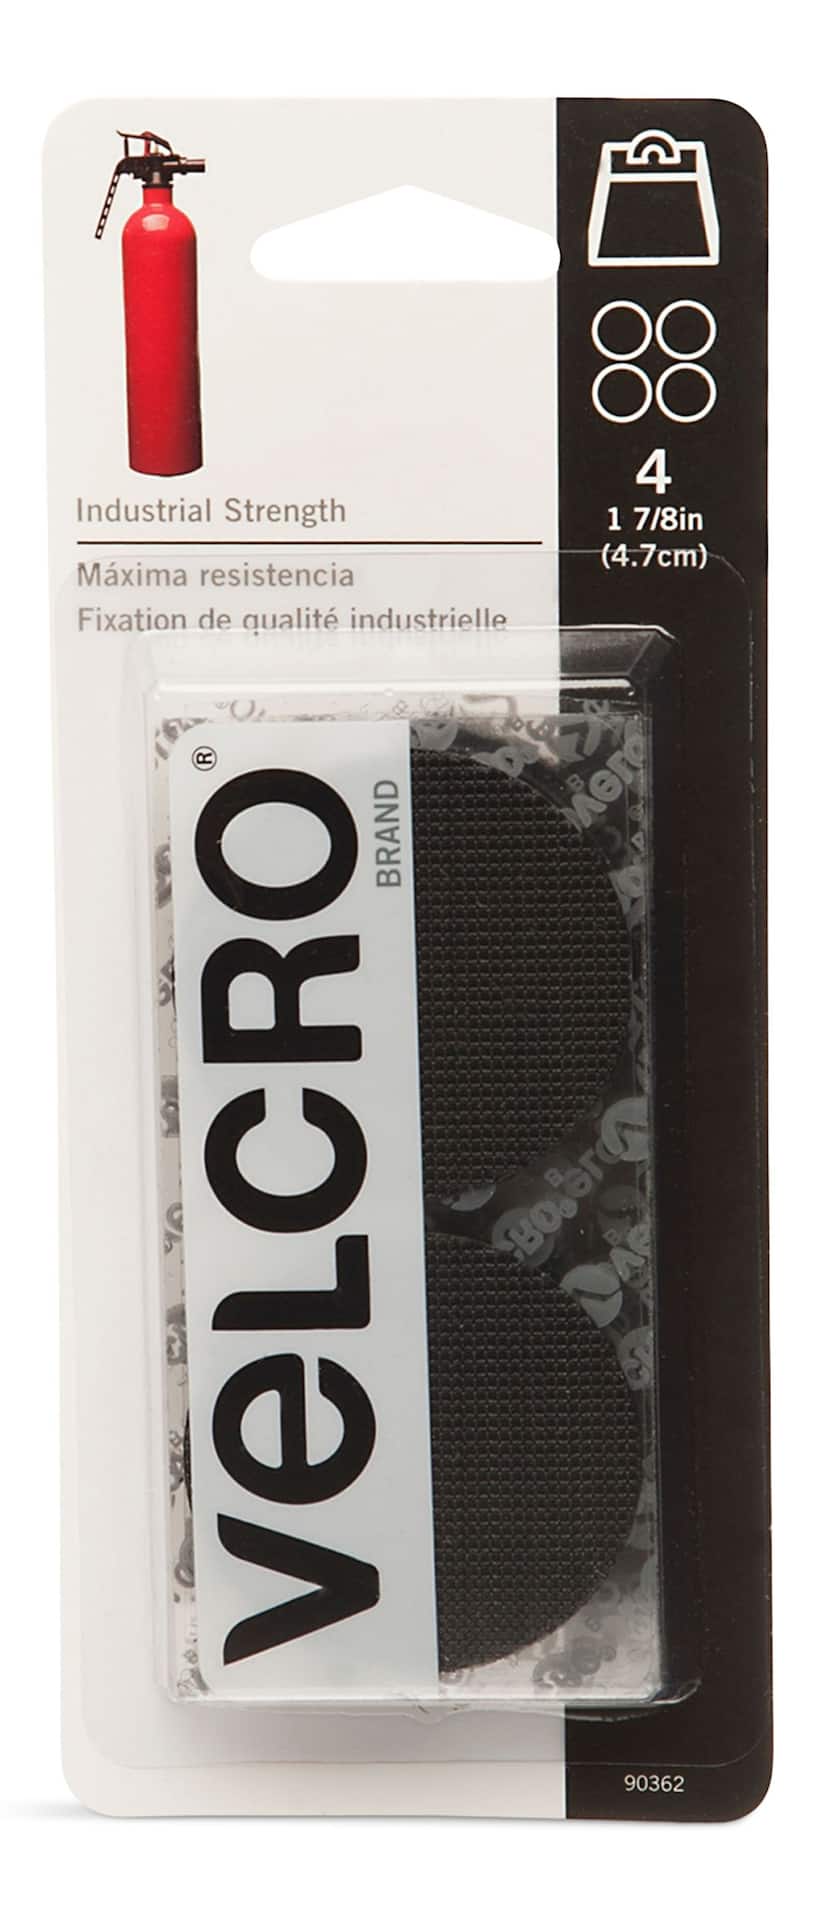 Many VELCRO® Brand products are OEKO-TEX® STANDARD 100 Certified